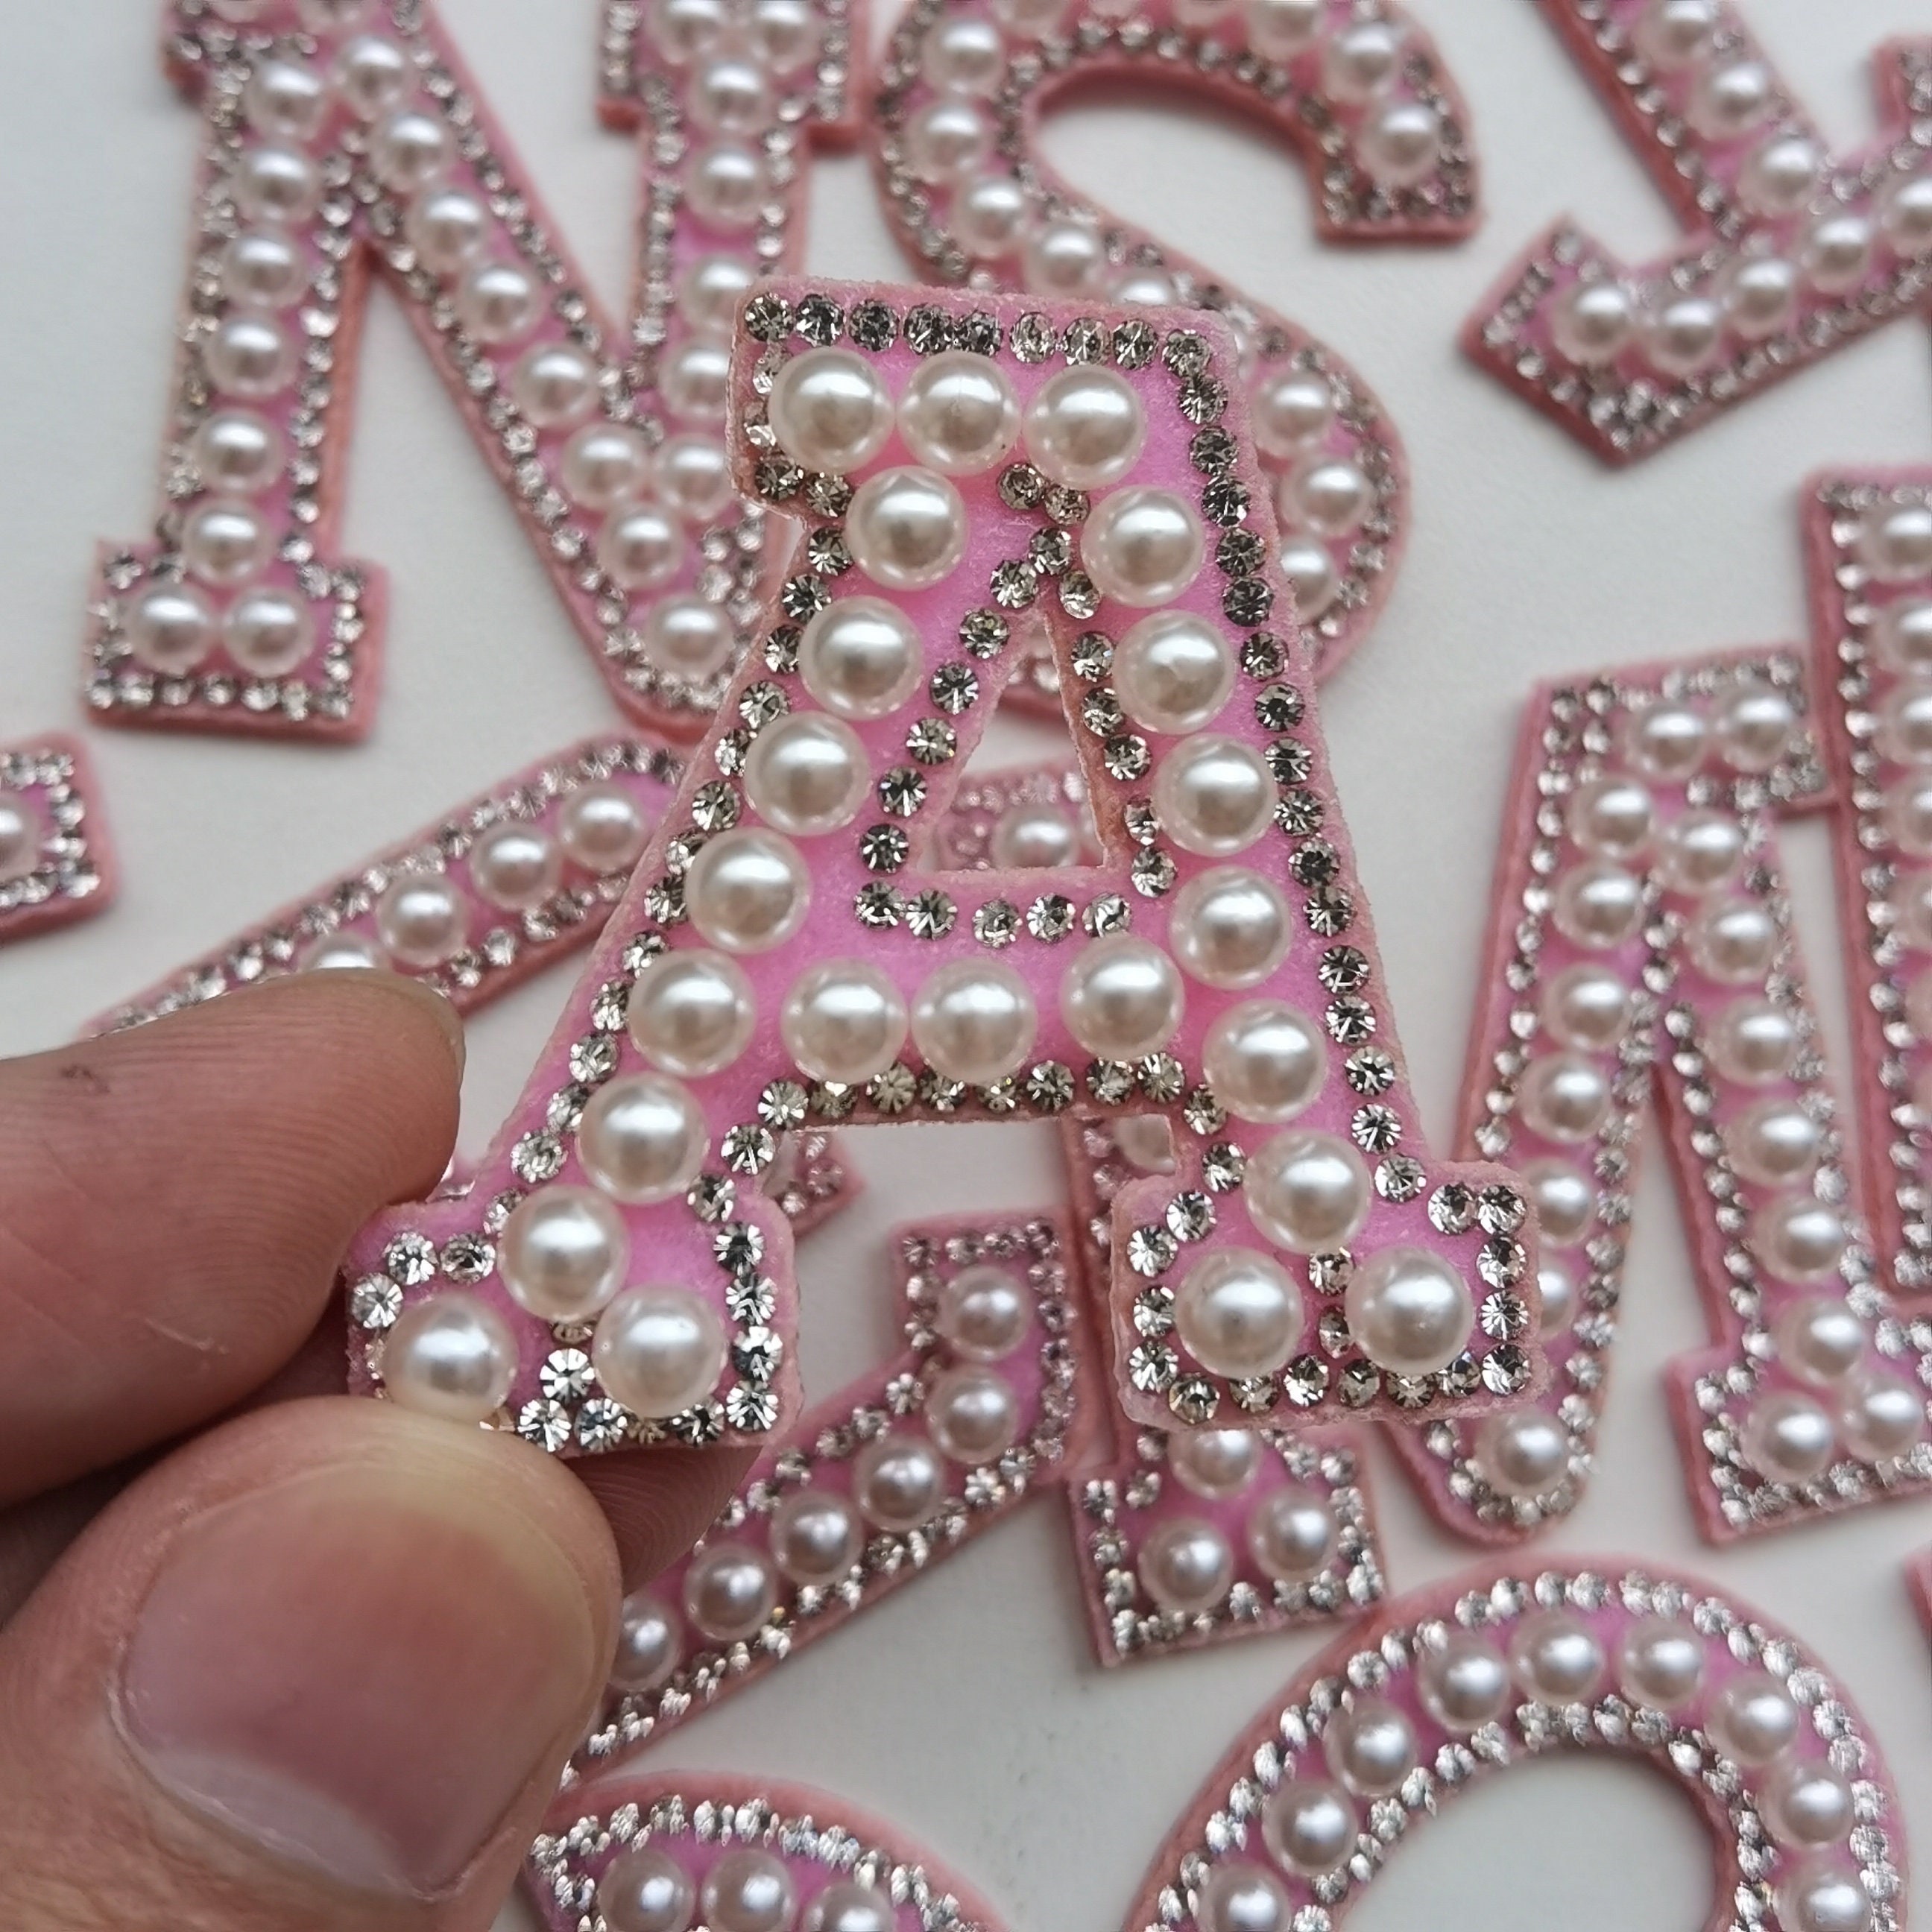 R LETTER Rhinestone Iron on Heat Transfer, Iron on Patches Letters, Iron on  Letters for Fabric, Letter Patches Iron On, Pearl Letter Patch 